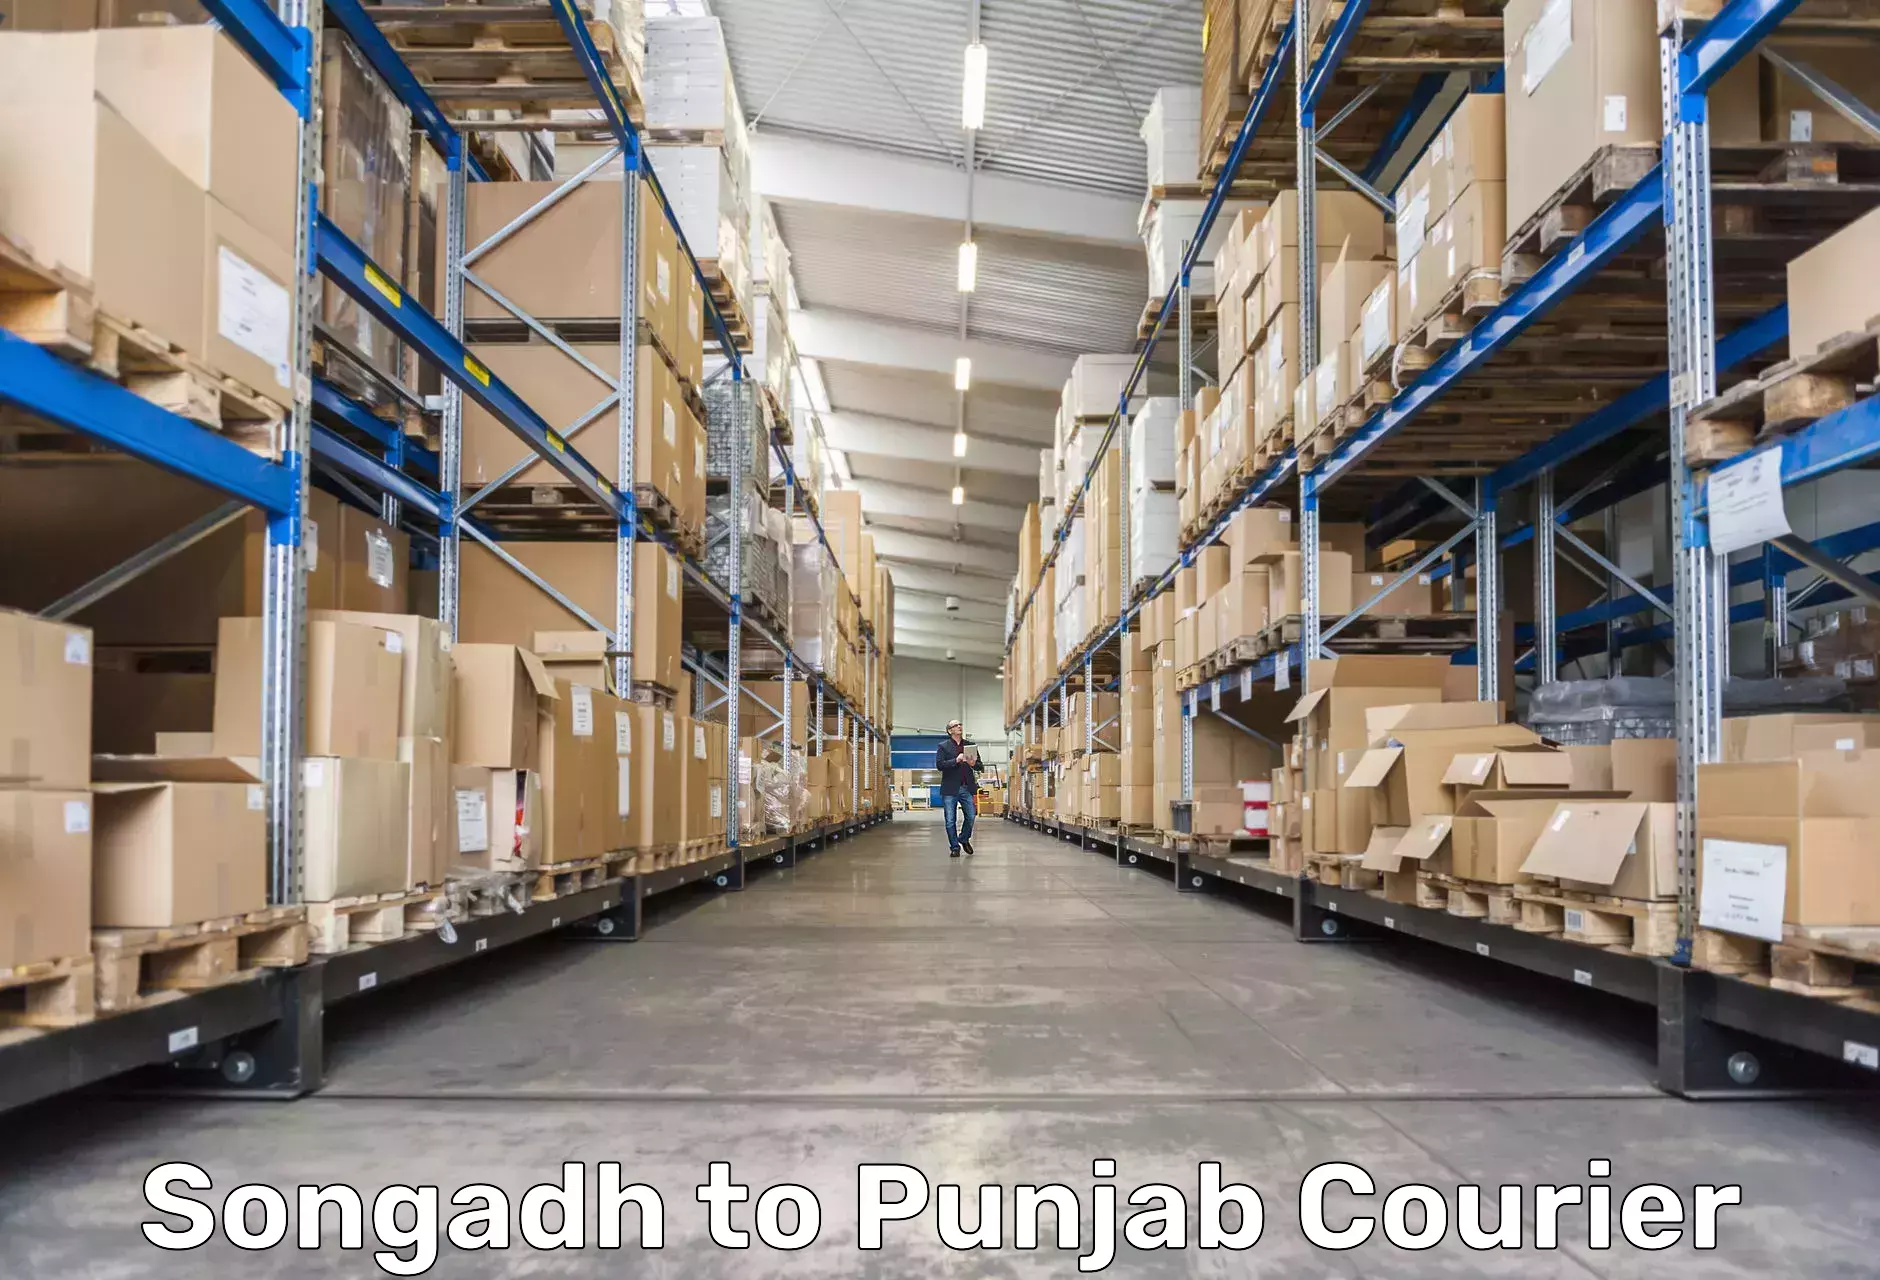 Parcel service for businesses Songadh to Punjab